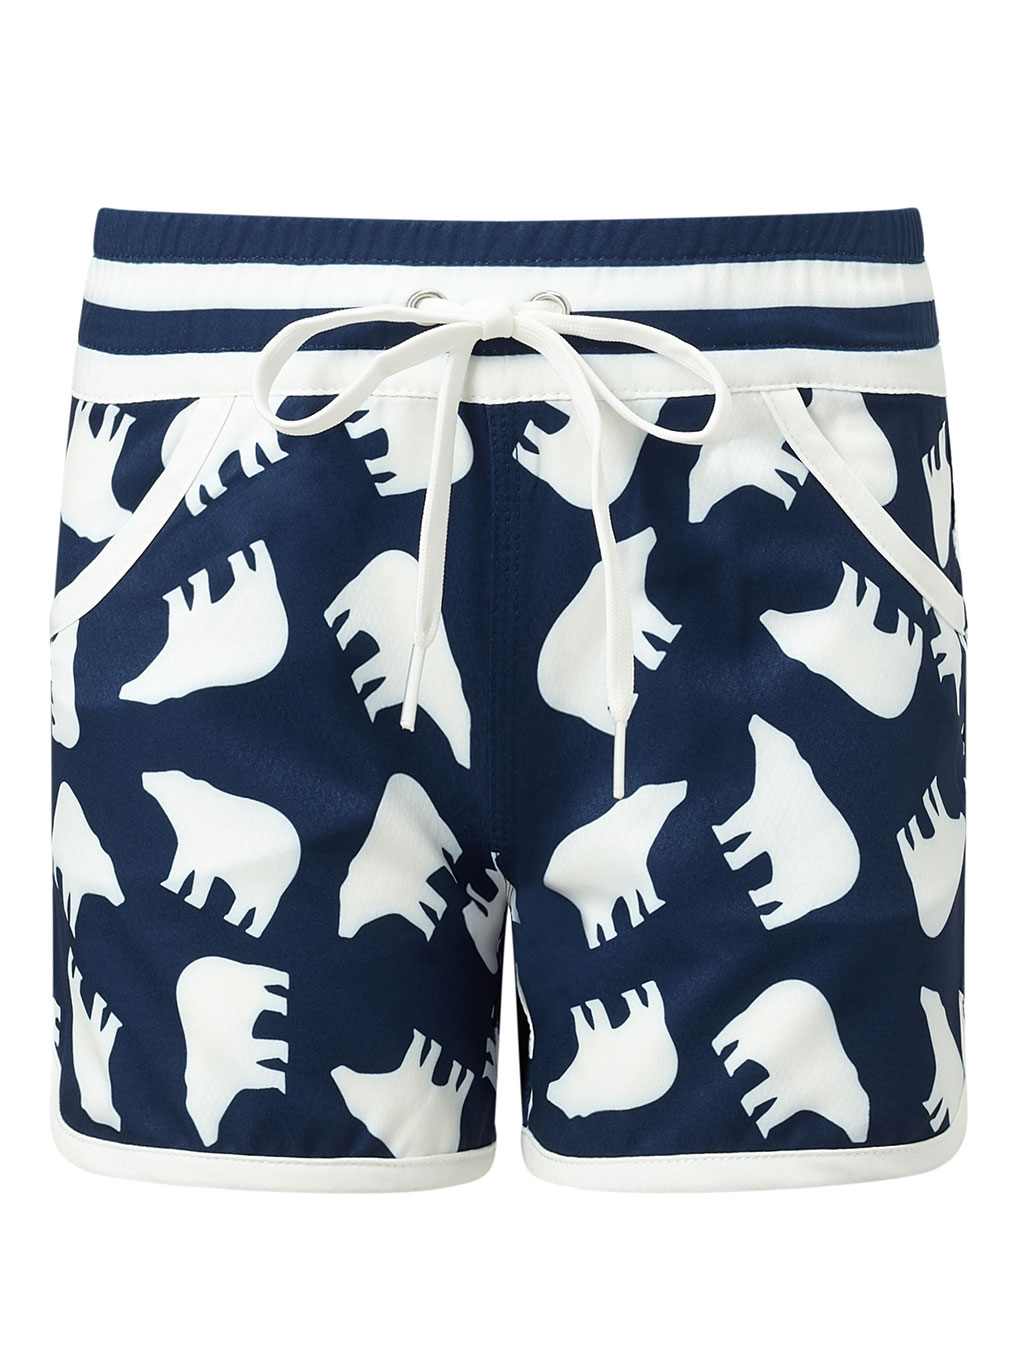 Perfect Moment Bear Resort Shorts Y6 In Navy-white-bear-print